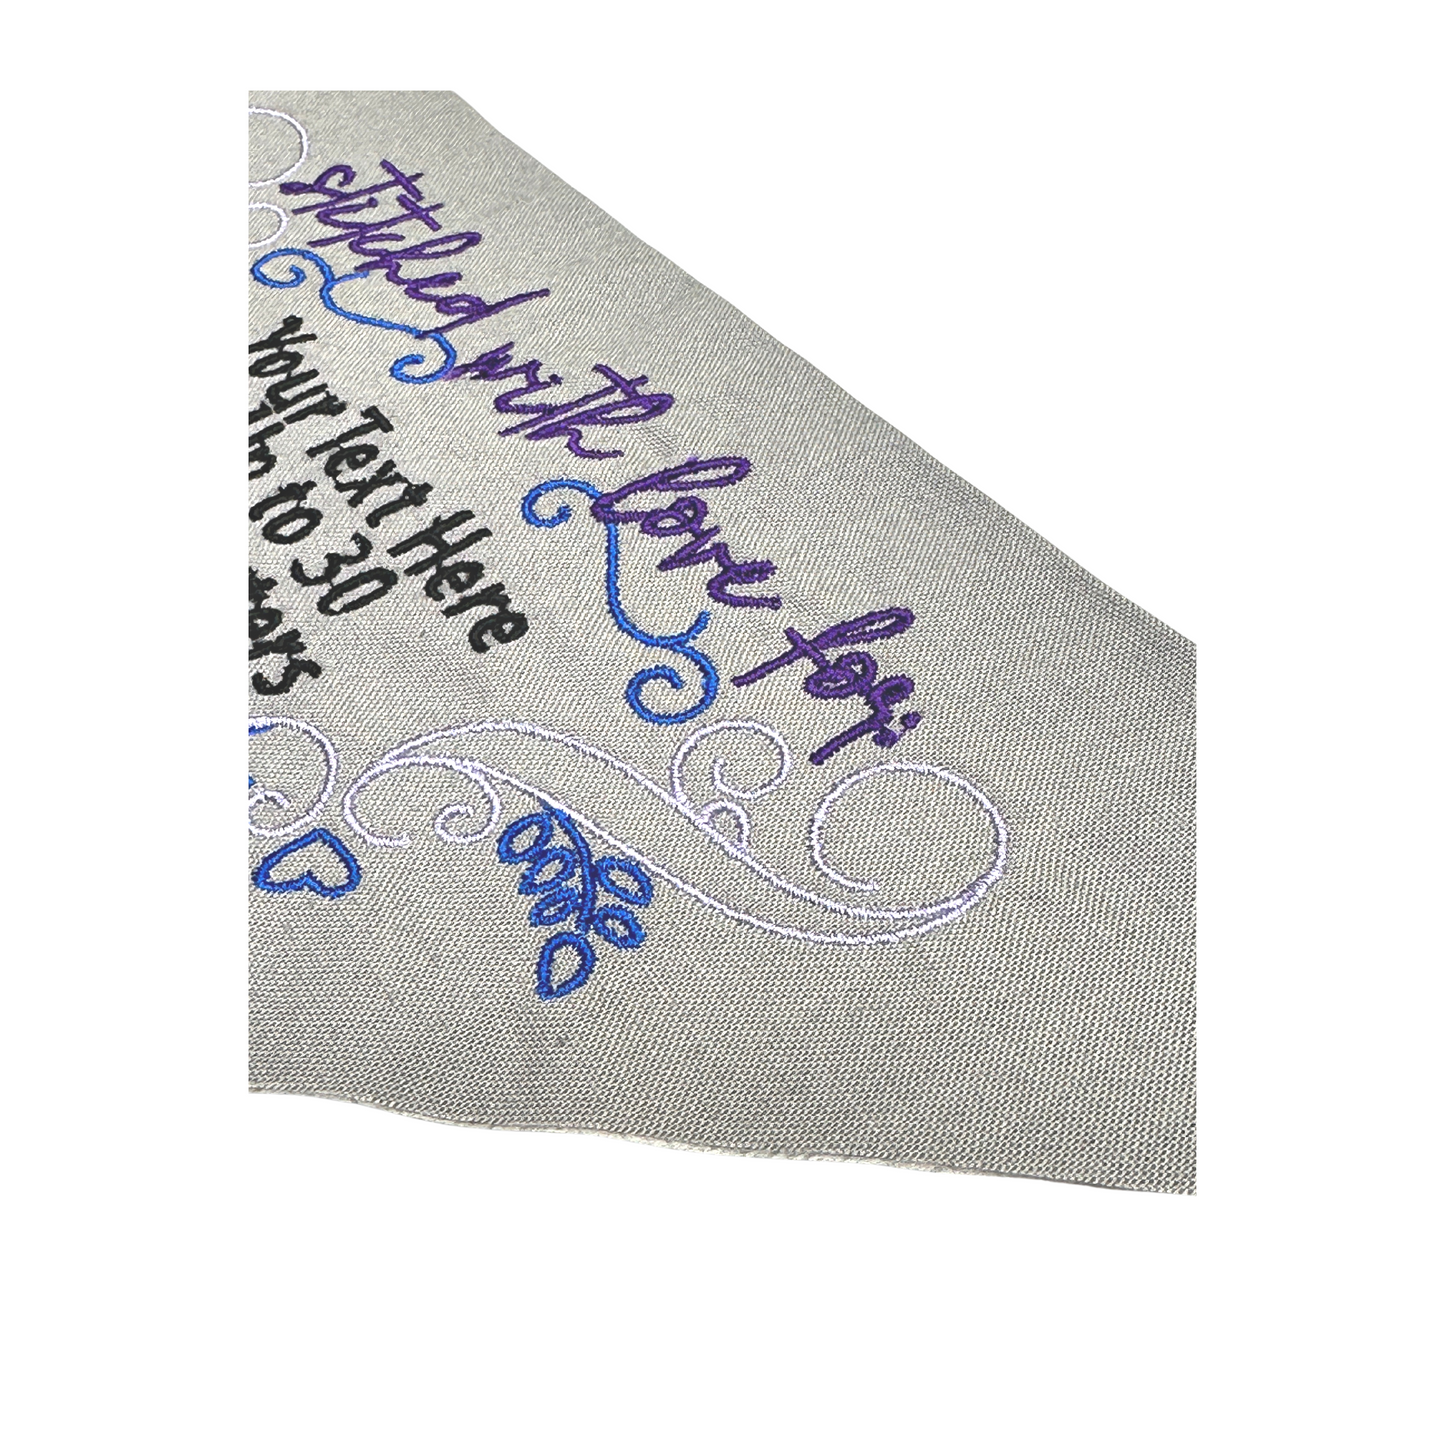 Stitched With Love Embroidered Quilt Label